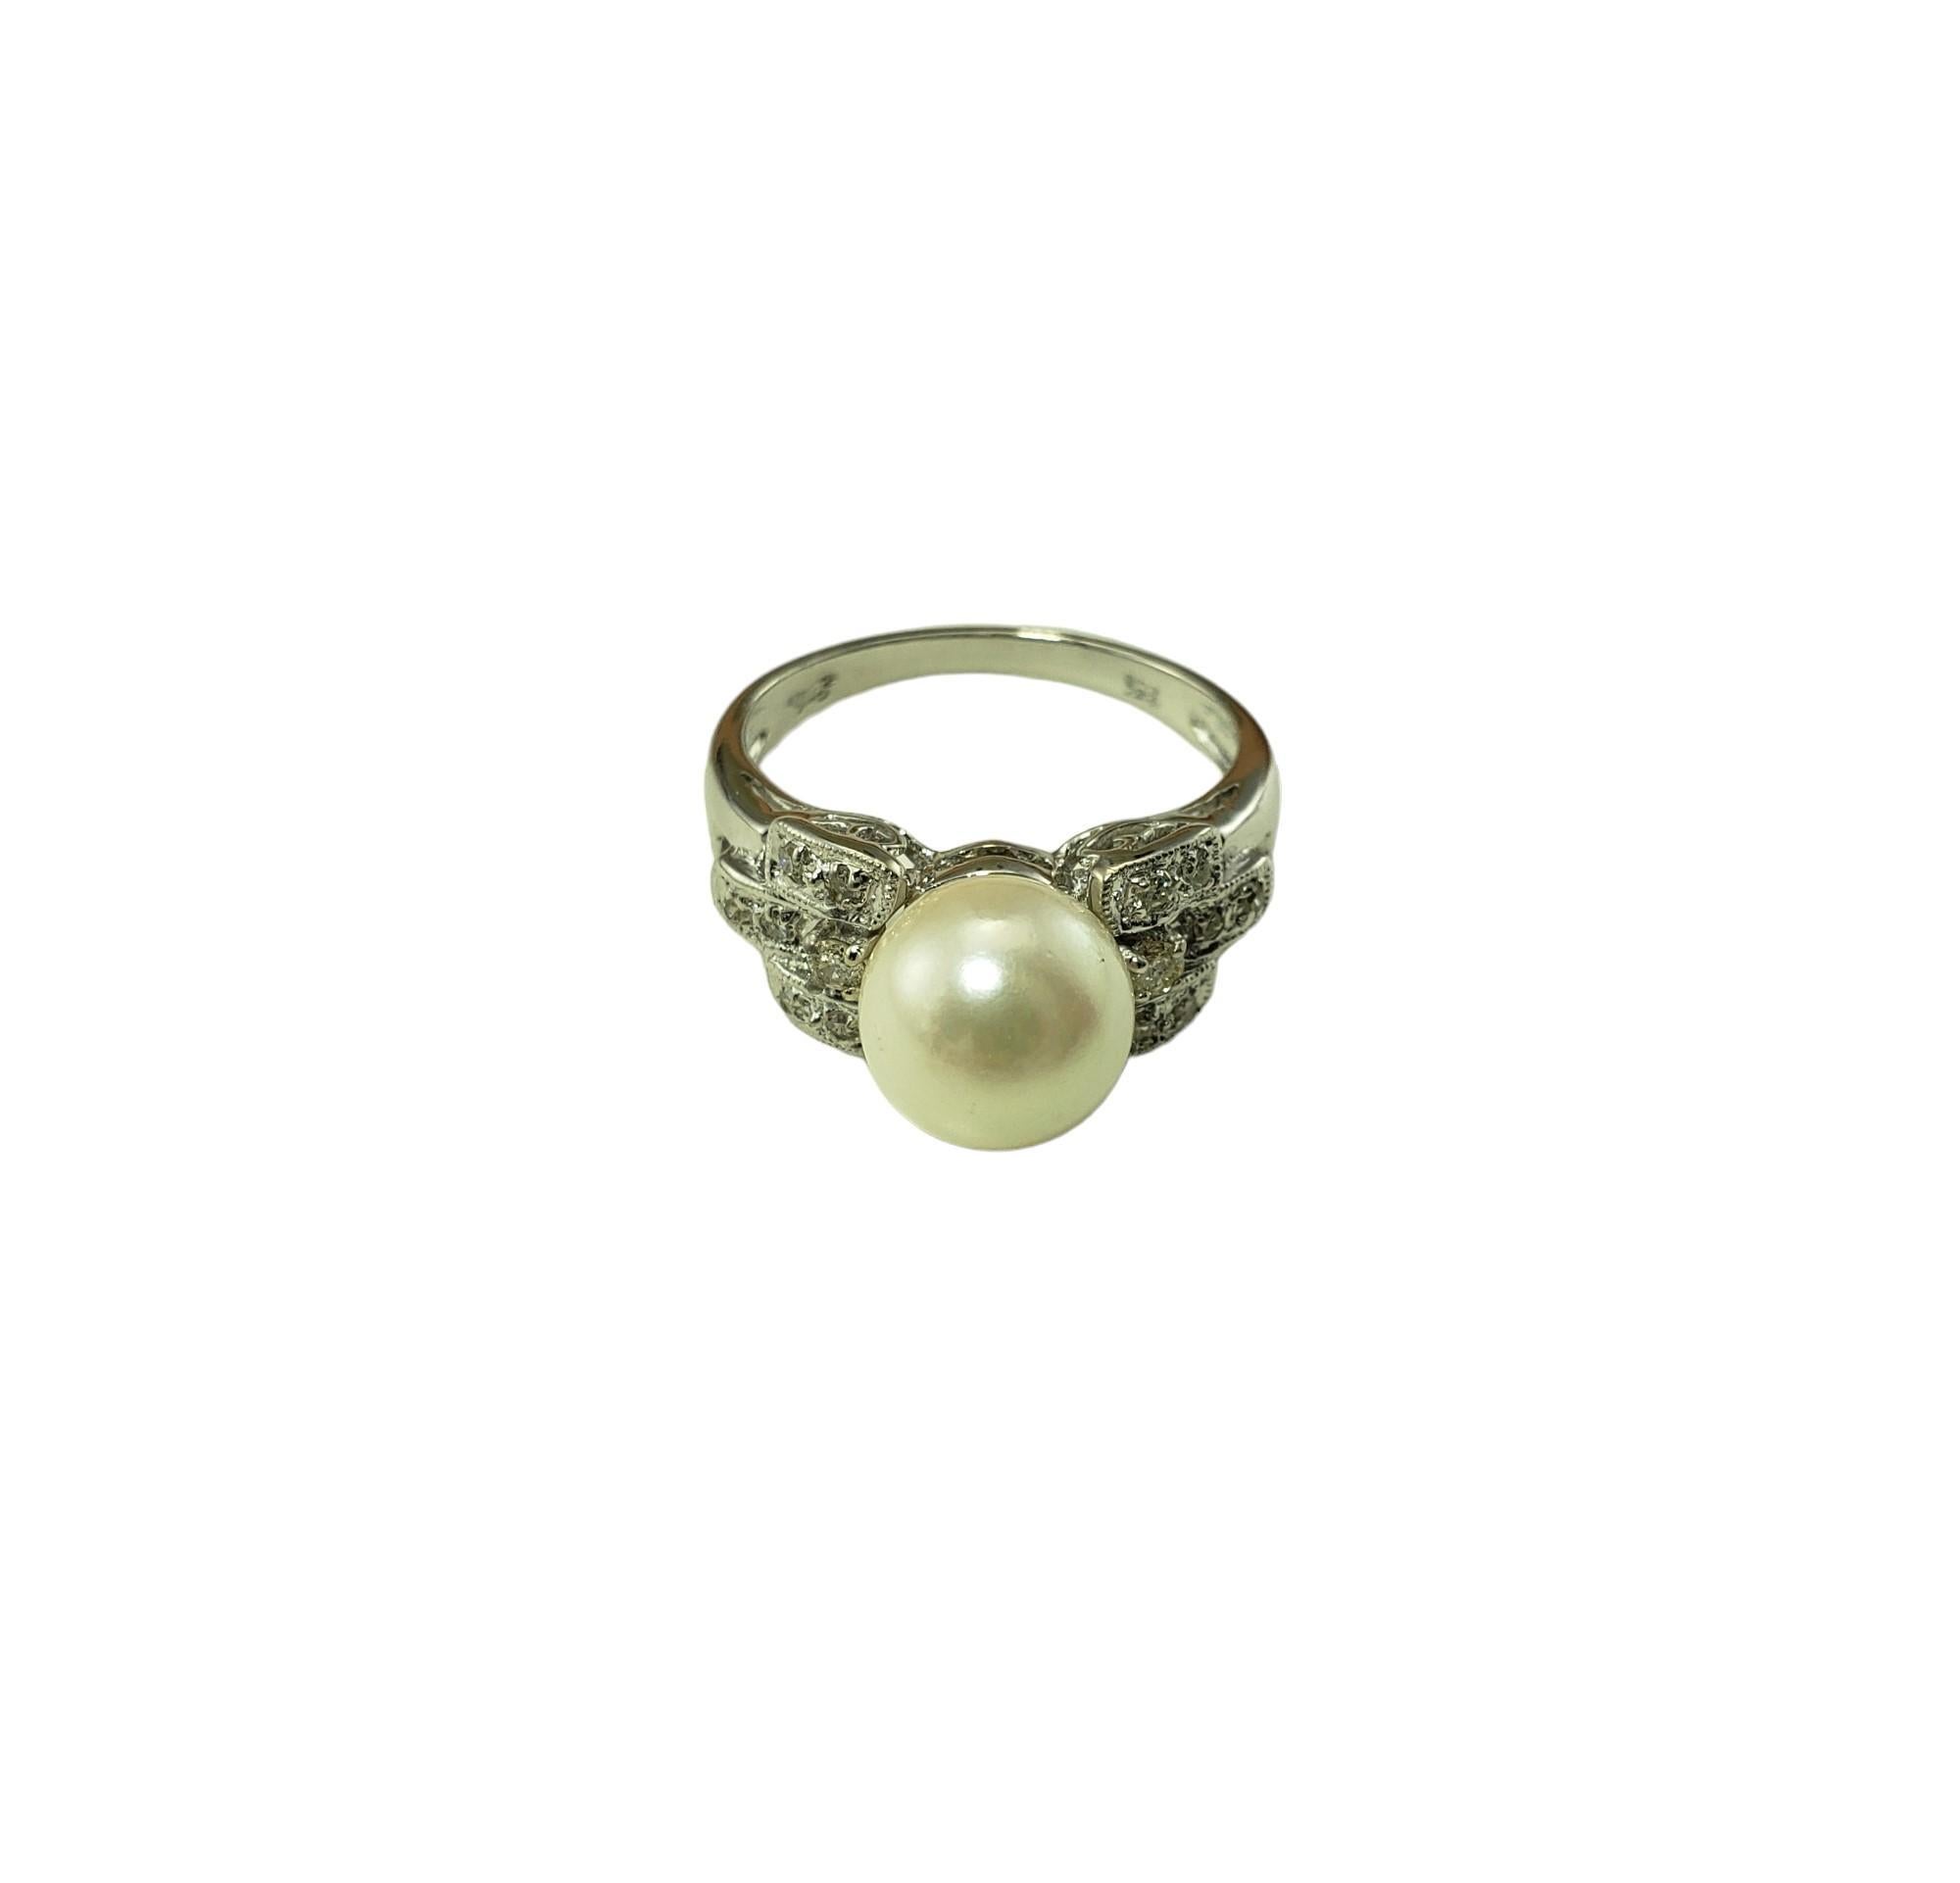 Vintage 14 Karat white Gold Pearl and Diamond Ring Size 7.25-

This elegant ring features one round white pearl (9 mm), 12 round single cut diamonds and two round brilliant cut diamonds set in beautifully detailed 14K white gold.  Shank: 2